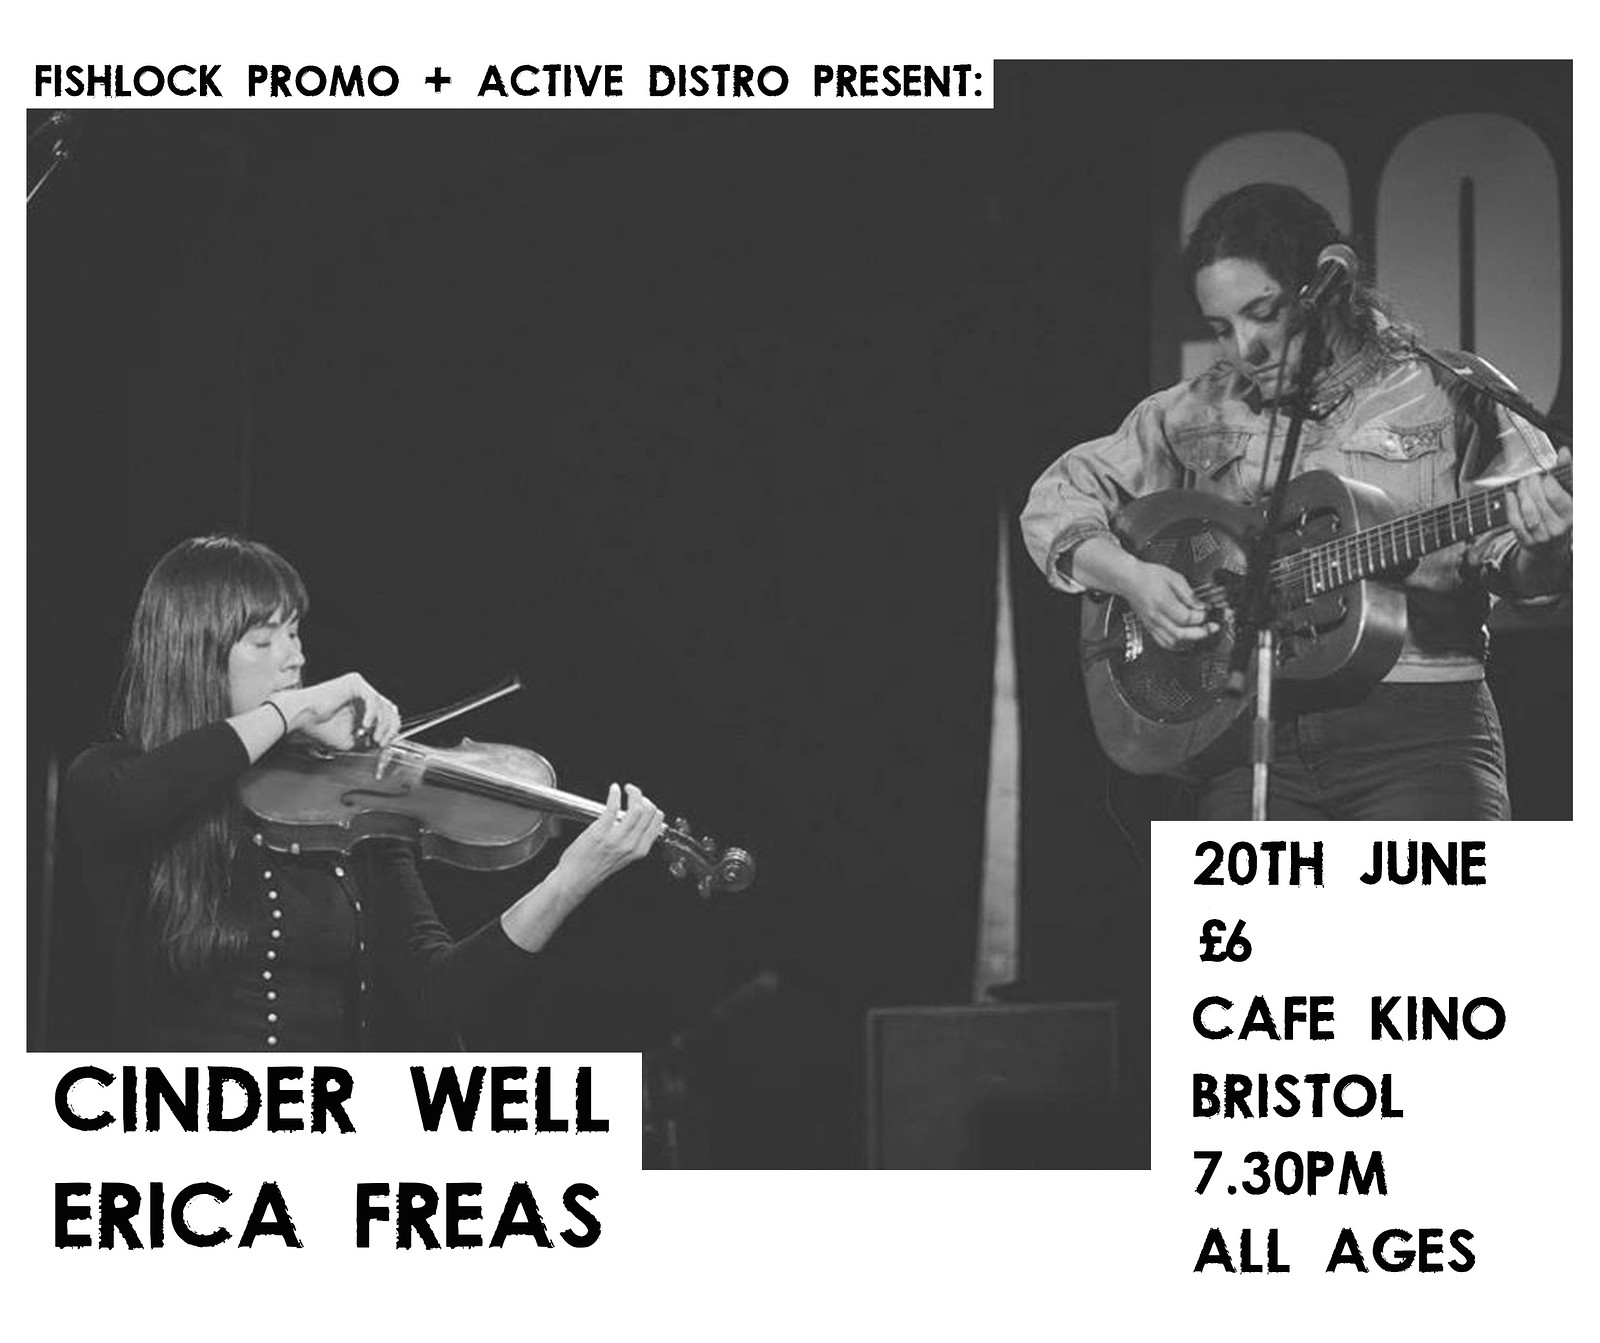 Cinder Well + Erica Freas at Cafe Kino